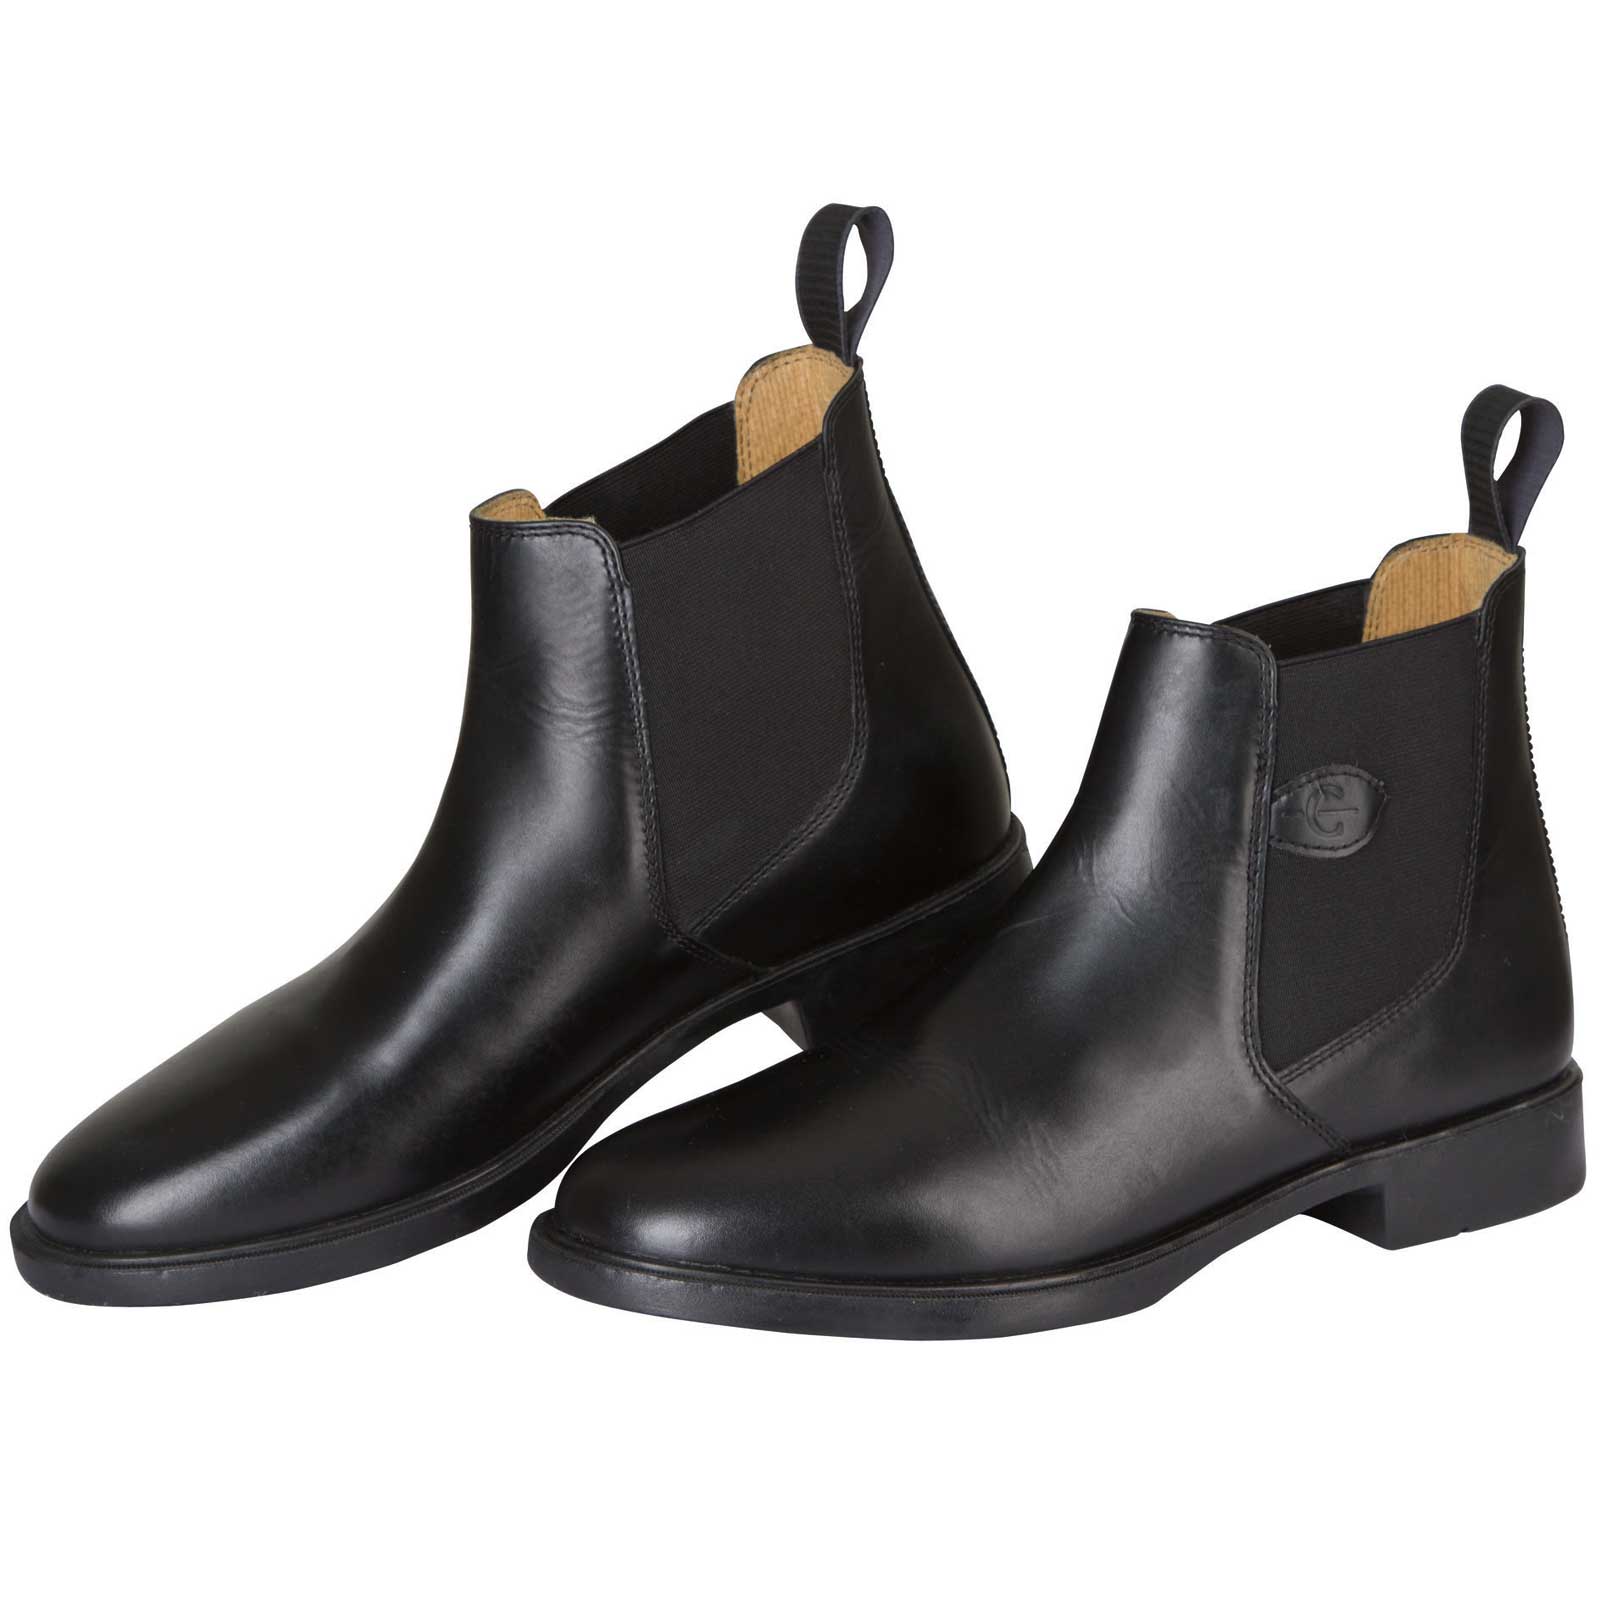 Riding Half-Boot Leather Classic black 36